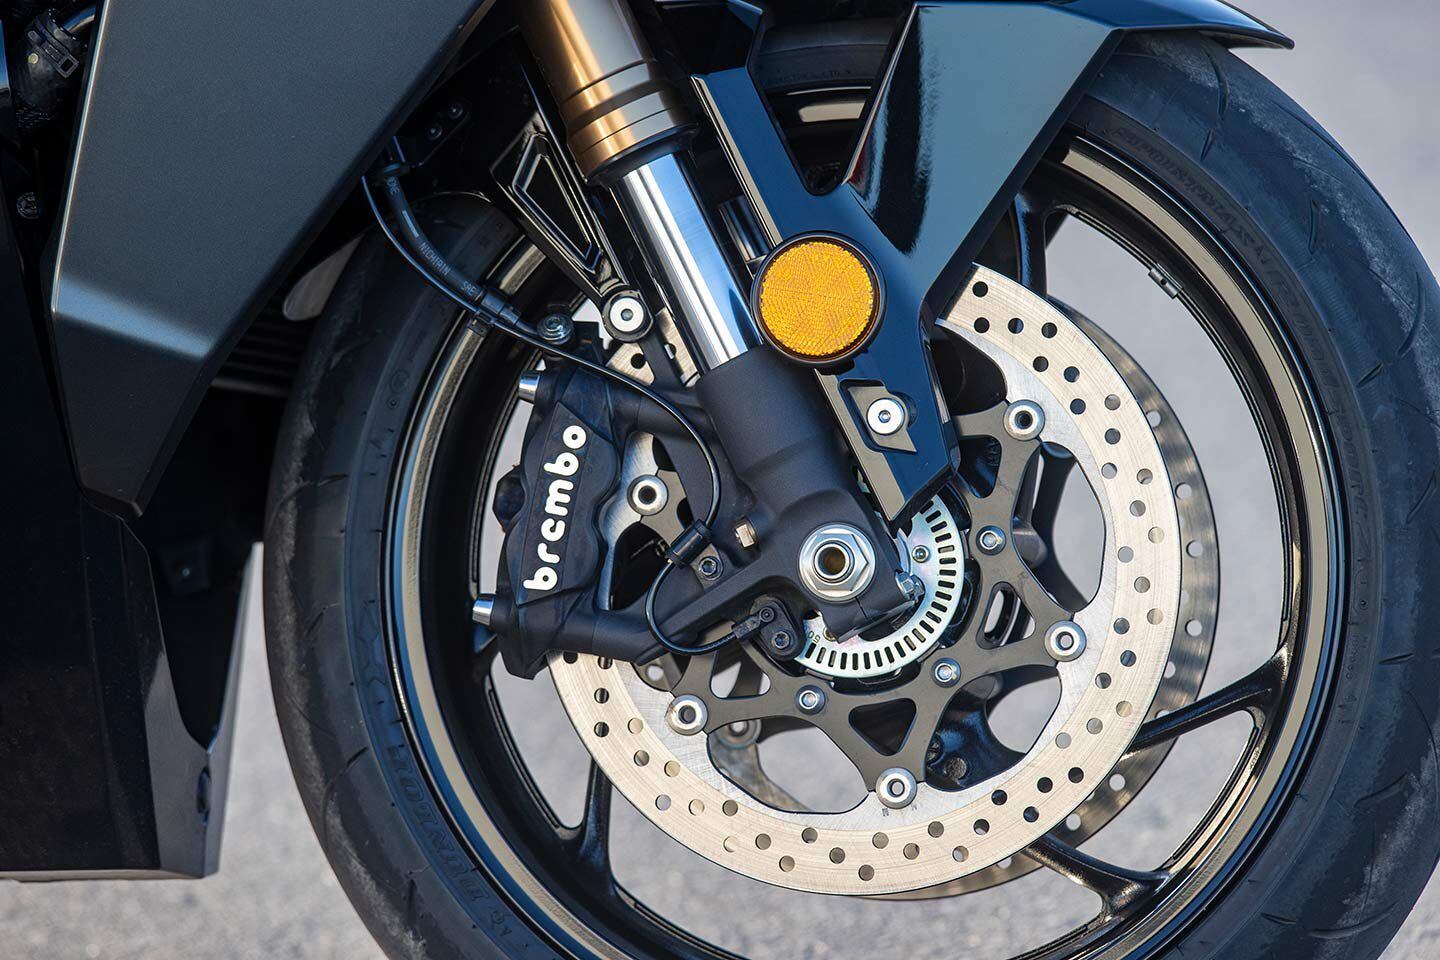 Brembo front brakes don’t have an aggressive initial bite, but power ramps up through the pull and brings a loaded-down GT+ to a stop with relative ease.